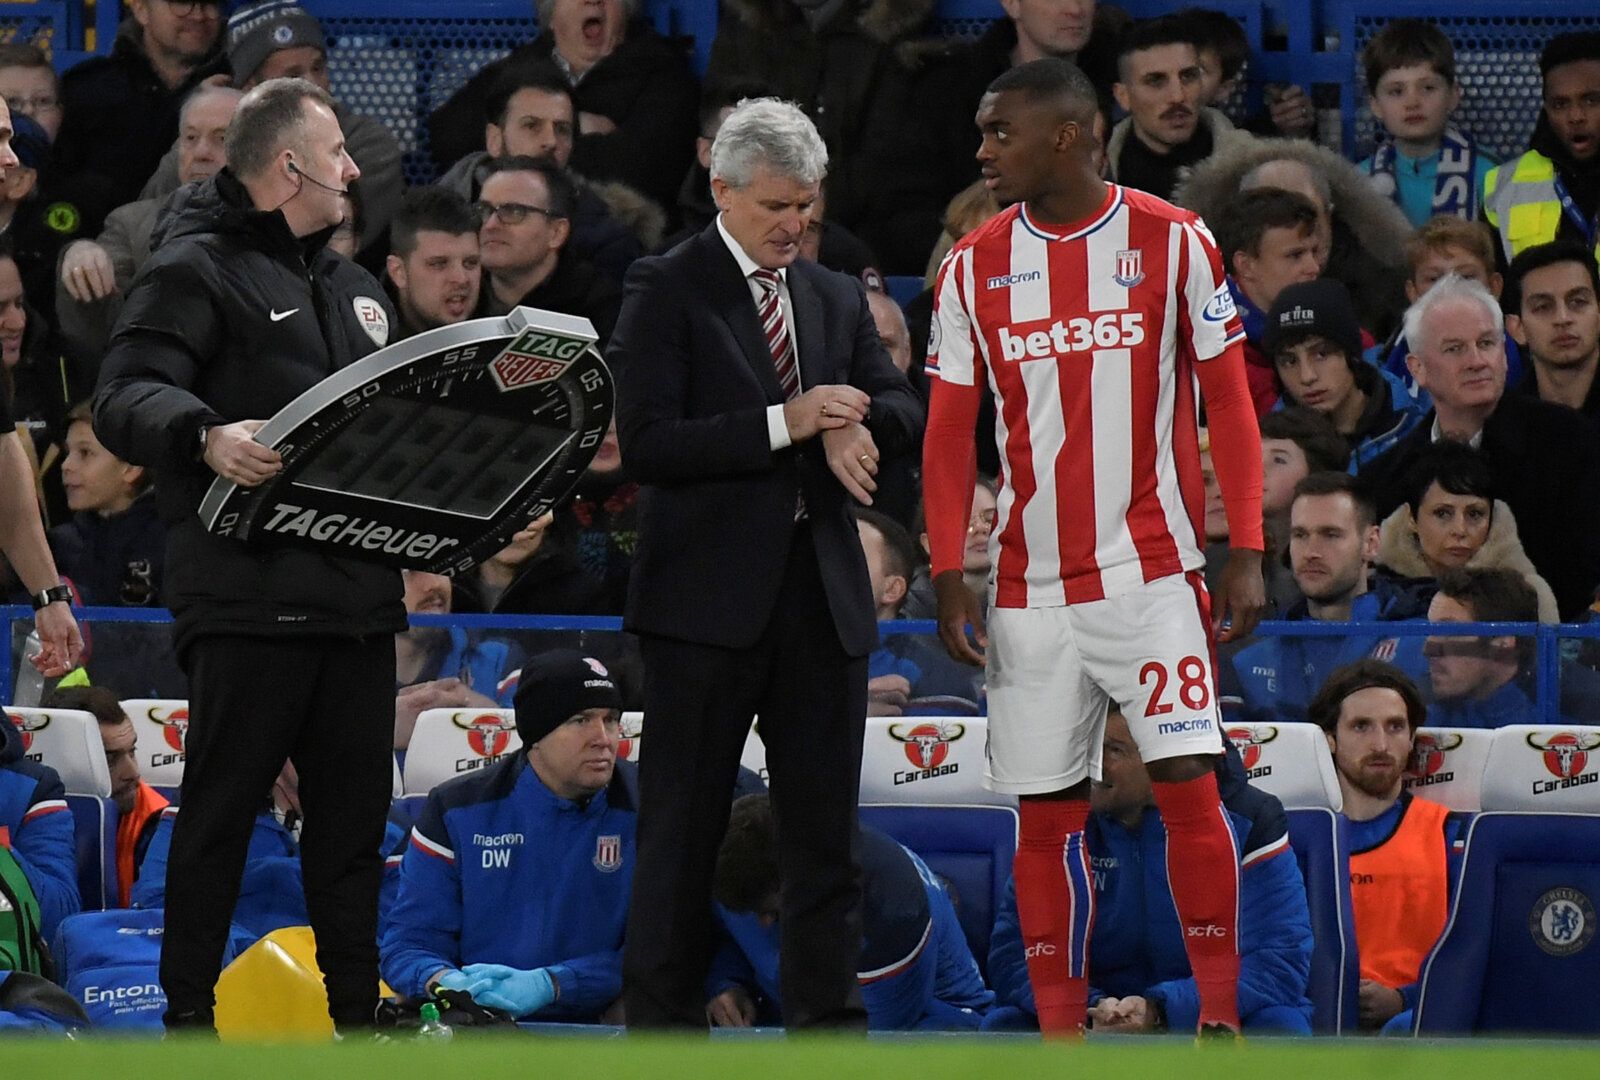 Soccer Football - Premier League - Chelsea vs Stoke City - Stamford Bridge, London, Britain - December 30, 2017   Stoke City's Julien Ngoy talks to manager Mark Hughes as he prepares to come on                 REUTERS/Toby Melville    EDITORIAL USE ONLY. No use with unauthorized audio, video, data, fixture lists, club/league logos or 